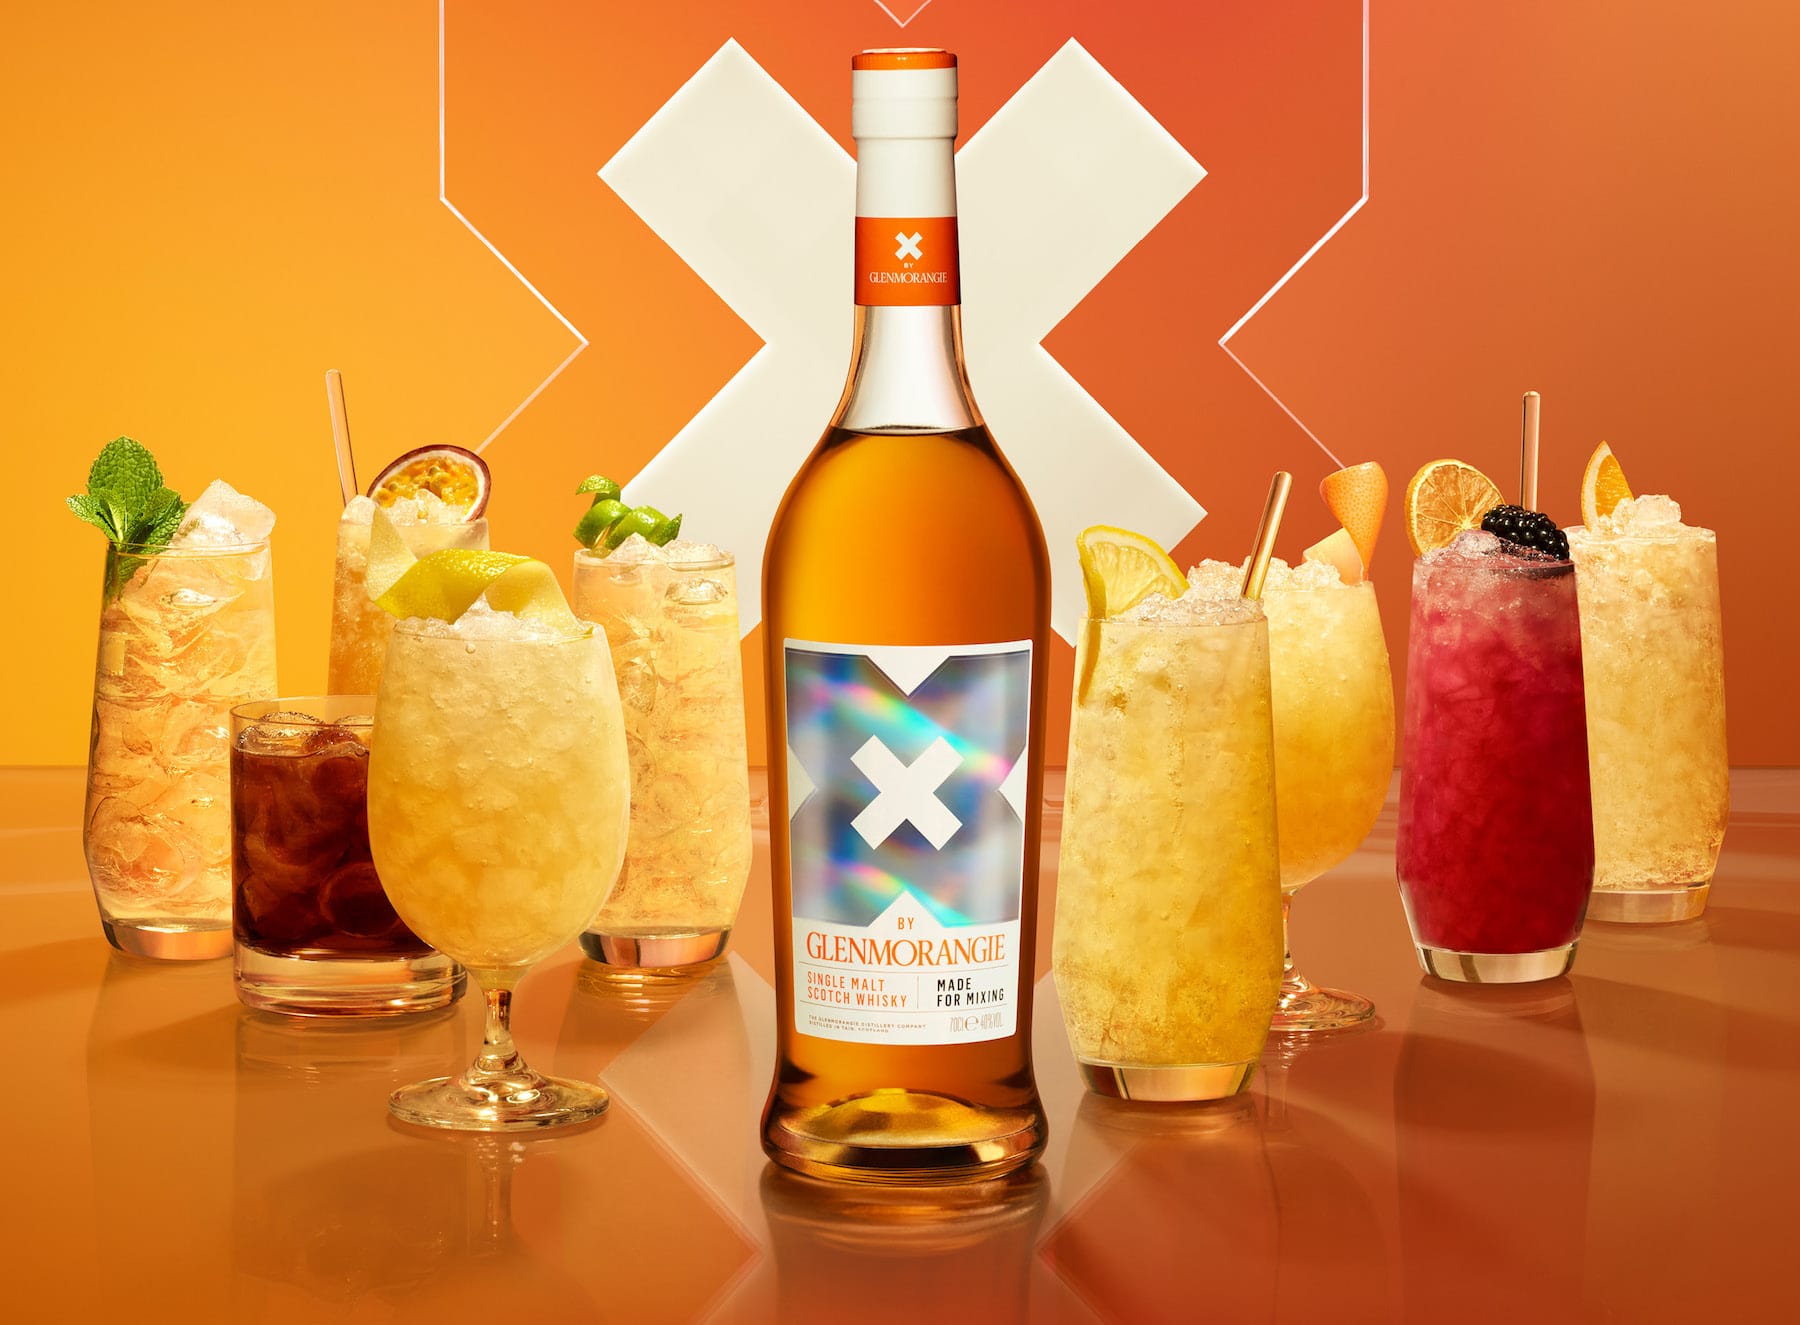 Glenmorangie X, a single malt whisky for mixing cocktails